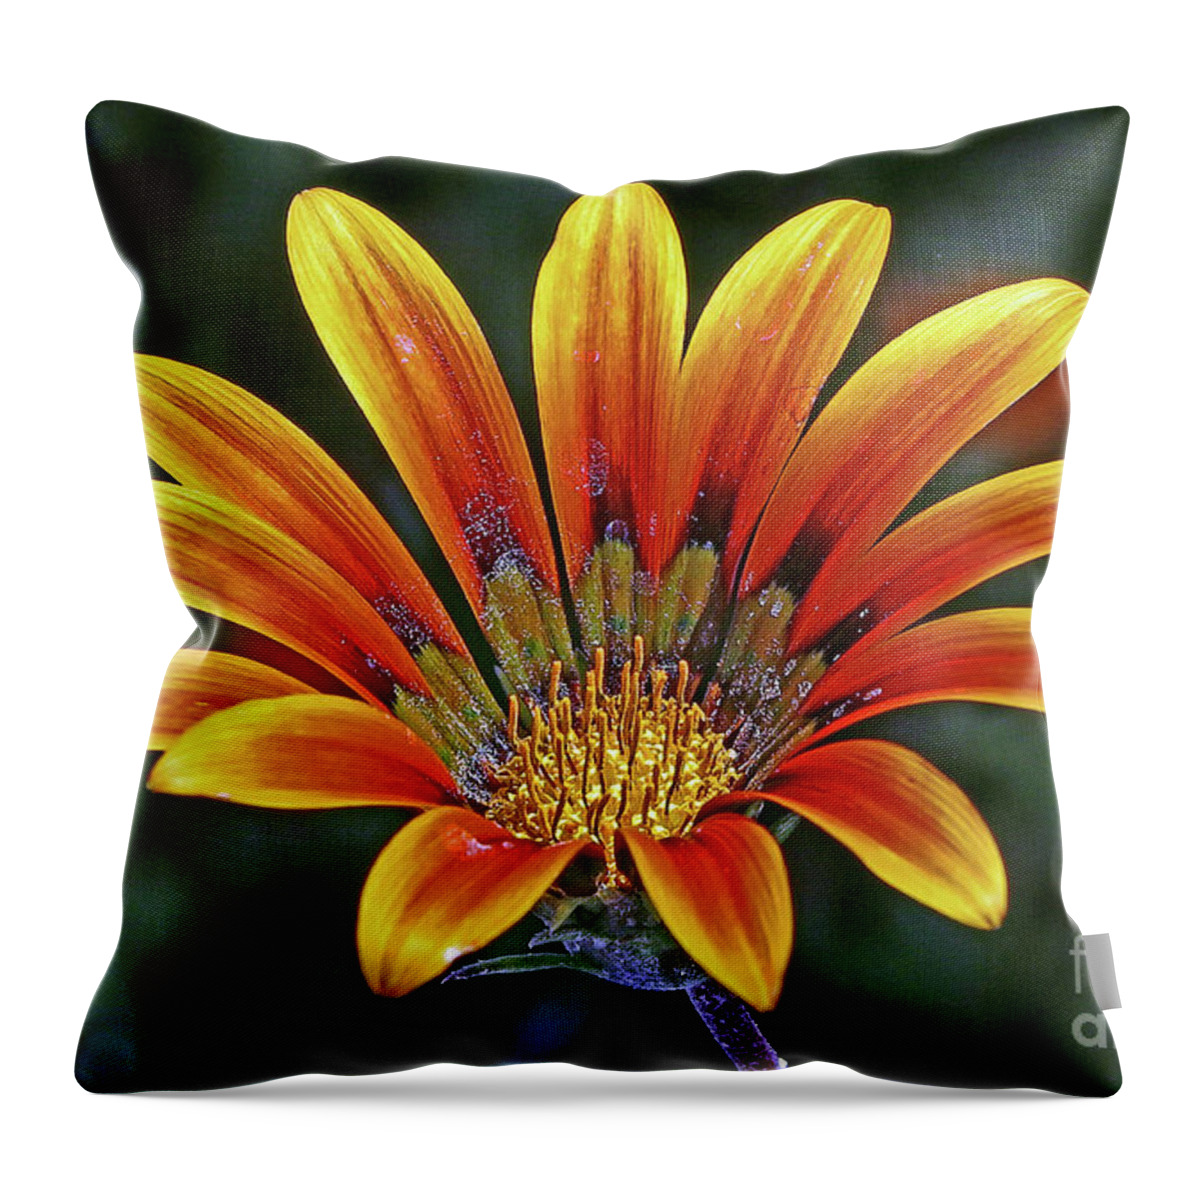 Daisy-like Flower Throw Pillow featuring the photograph Welcome by Hazel Vaughn